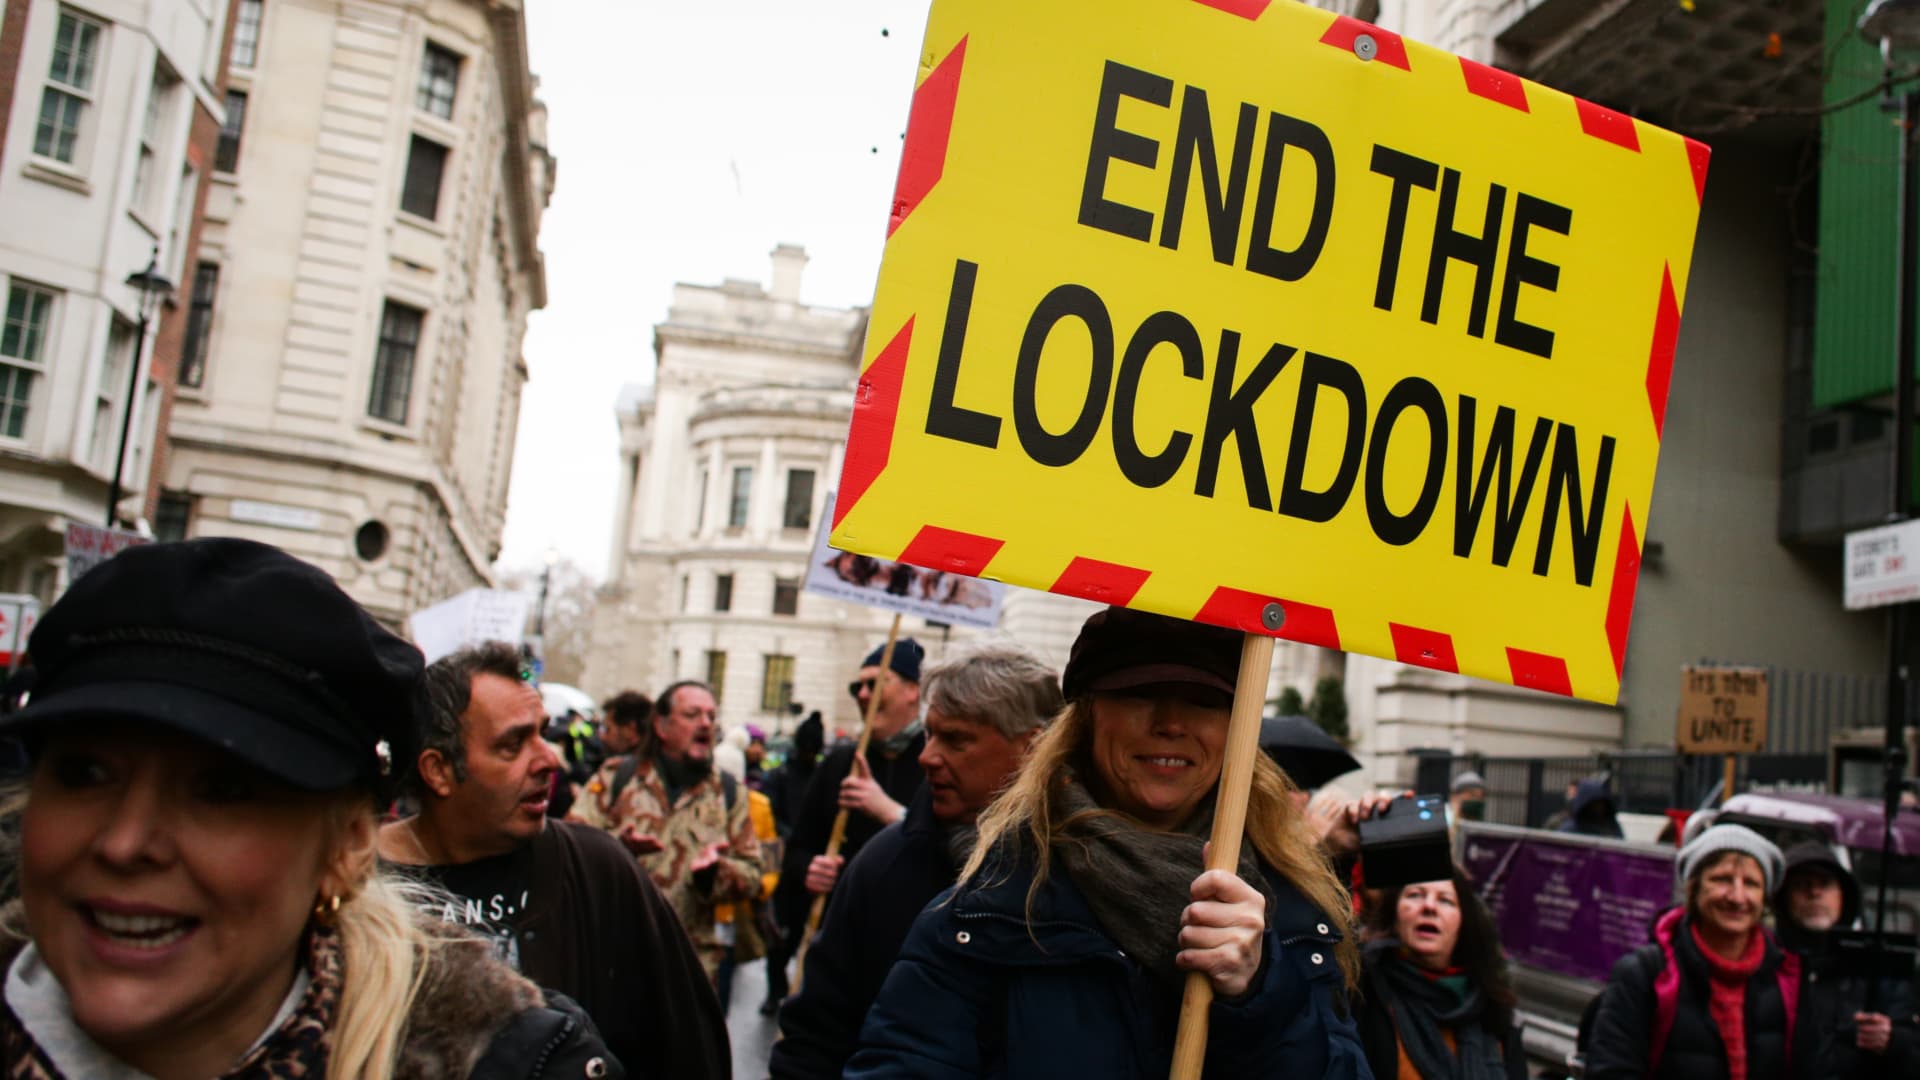 Activists protesting against coronavirus lockdown restrictions in London, England, on December 14, 2020.